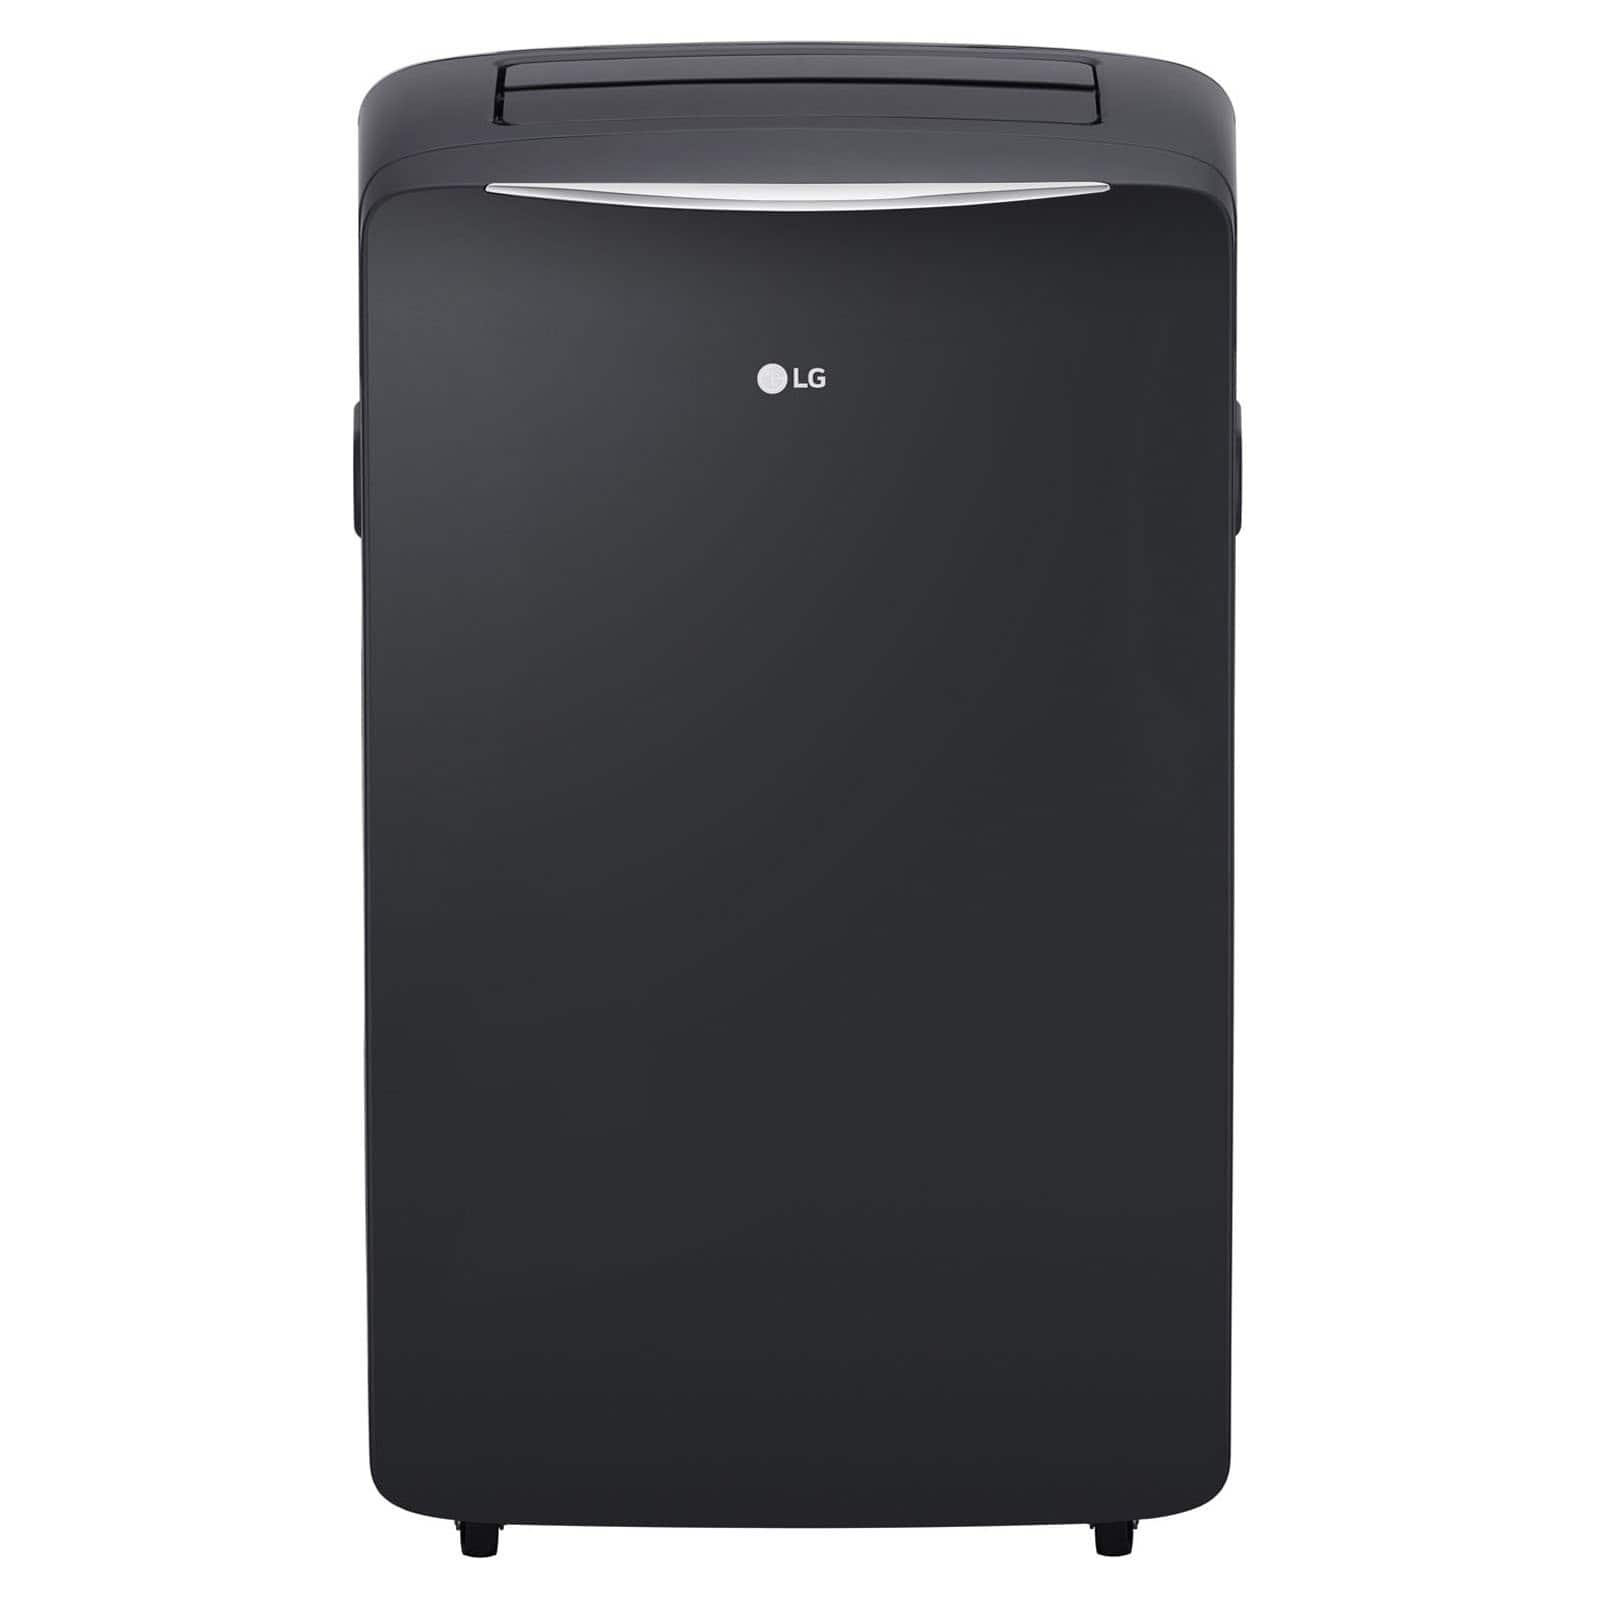 LG 115V Portable Air Conditioner with Remote Control in Graphite Gray for Rooms up to 500 Sq. Ft. - image 1 of 10